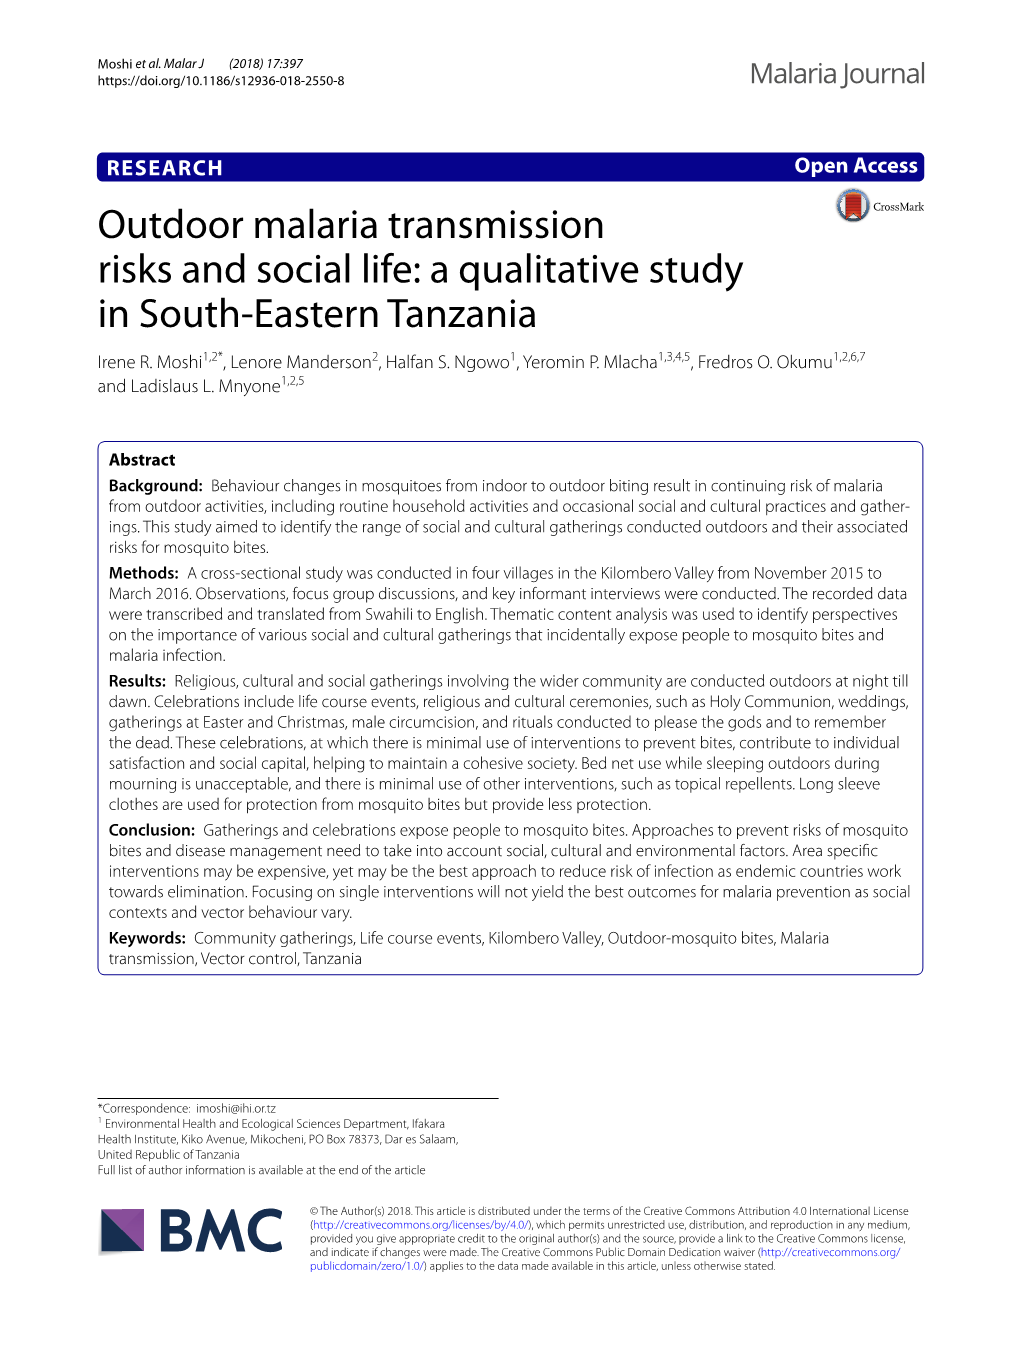 Outdoor Malaria Transmission Risks and Social Life: a Qualitative Study in South‑Eastern Tanzania Irene R